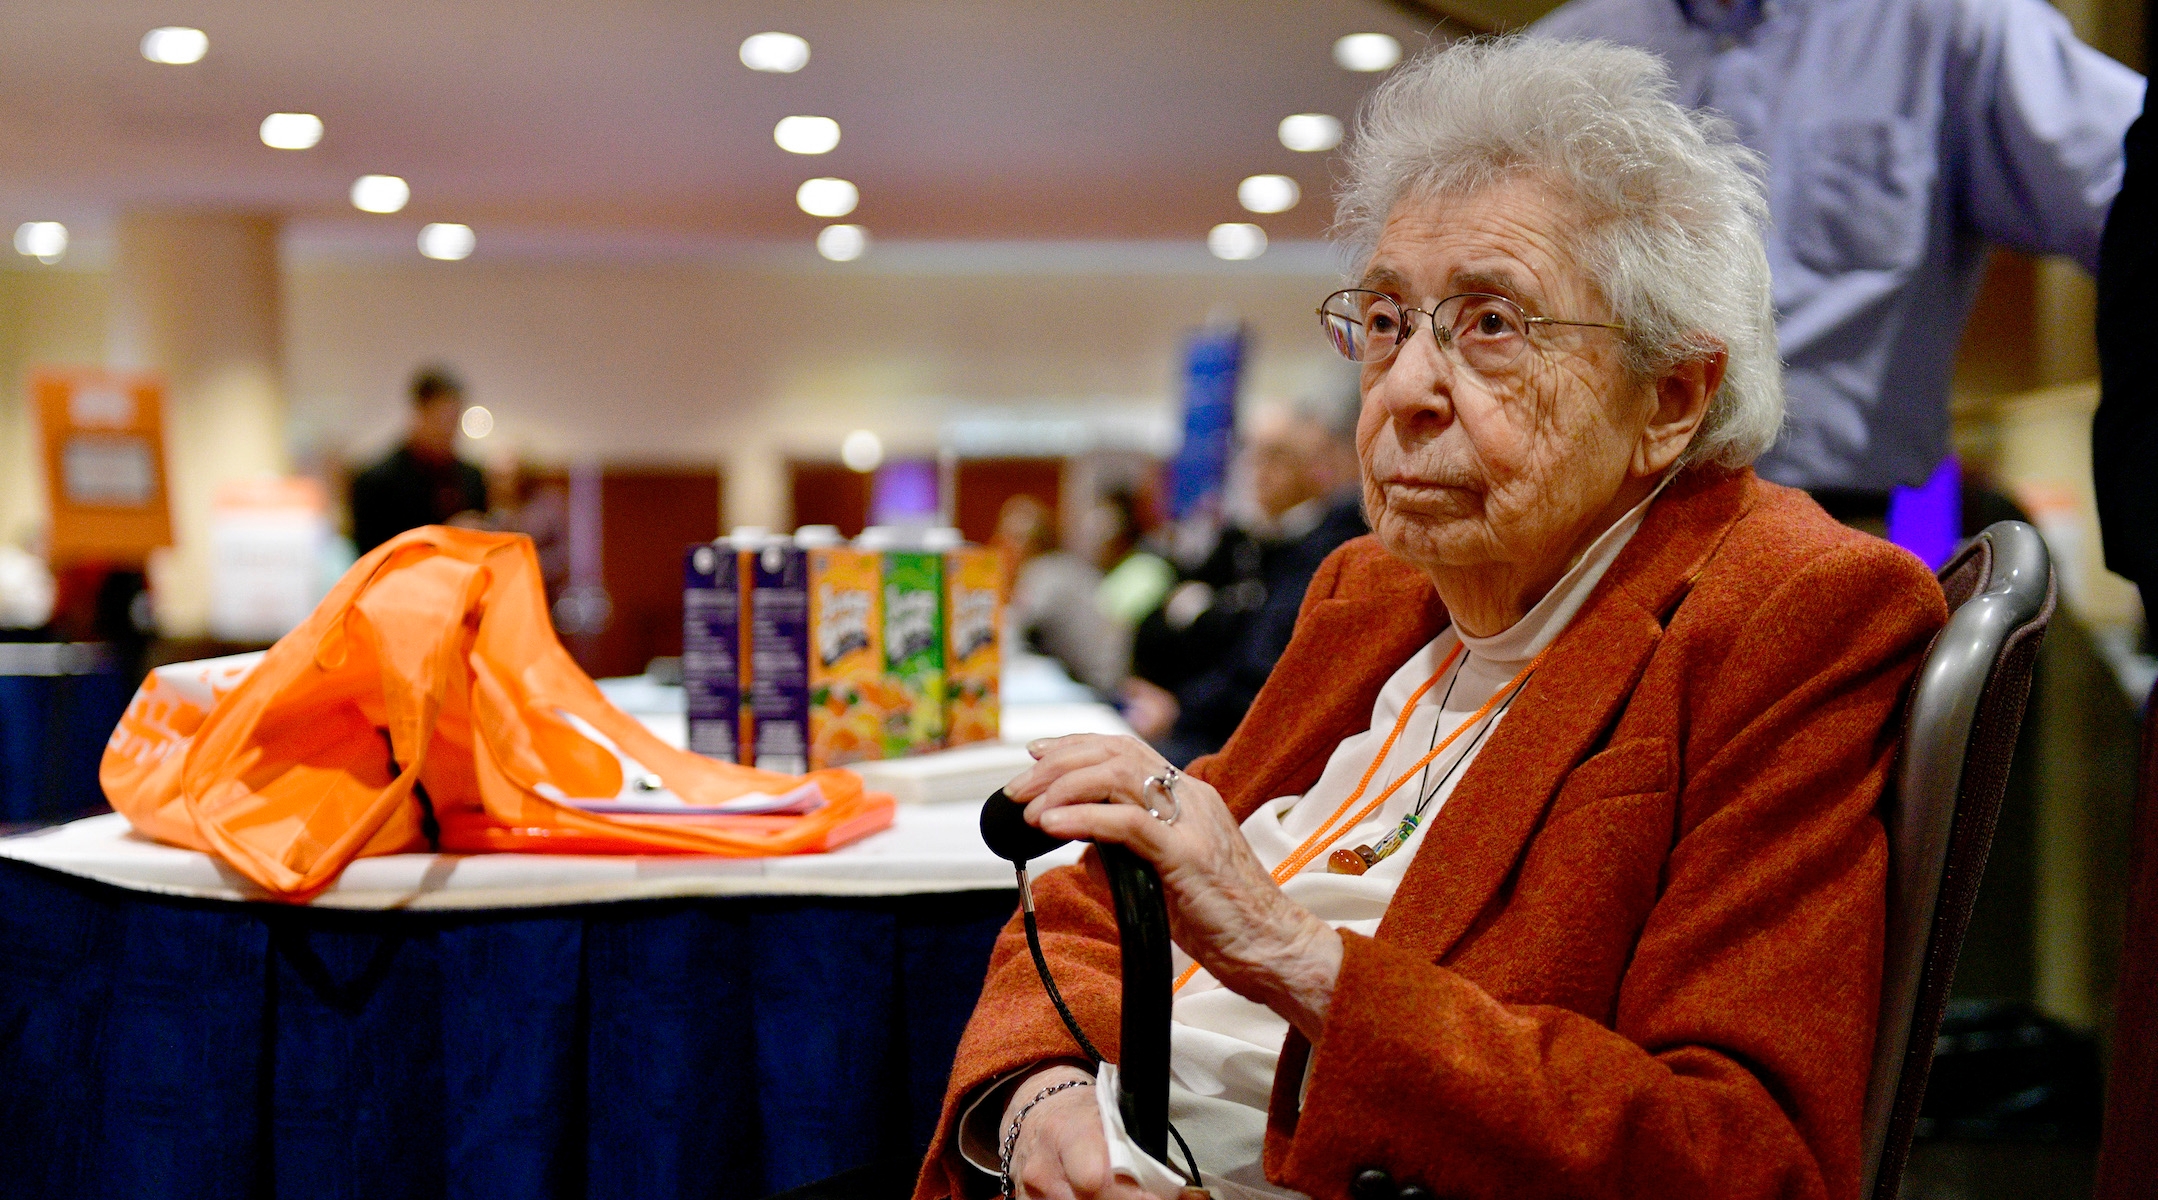 Kathy Goldman, founder of Food Bank for New York City, attends the organization’s 29th Annual Conference on Hunger and Poverty at Marriott Marquis Times Square, Feb. 13, 2020. (Eugene Gologursky/Getty Images for Food Bank for New York City)